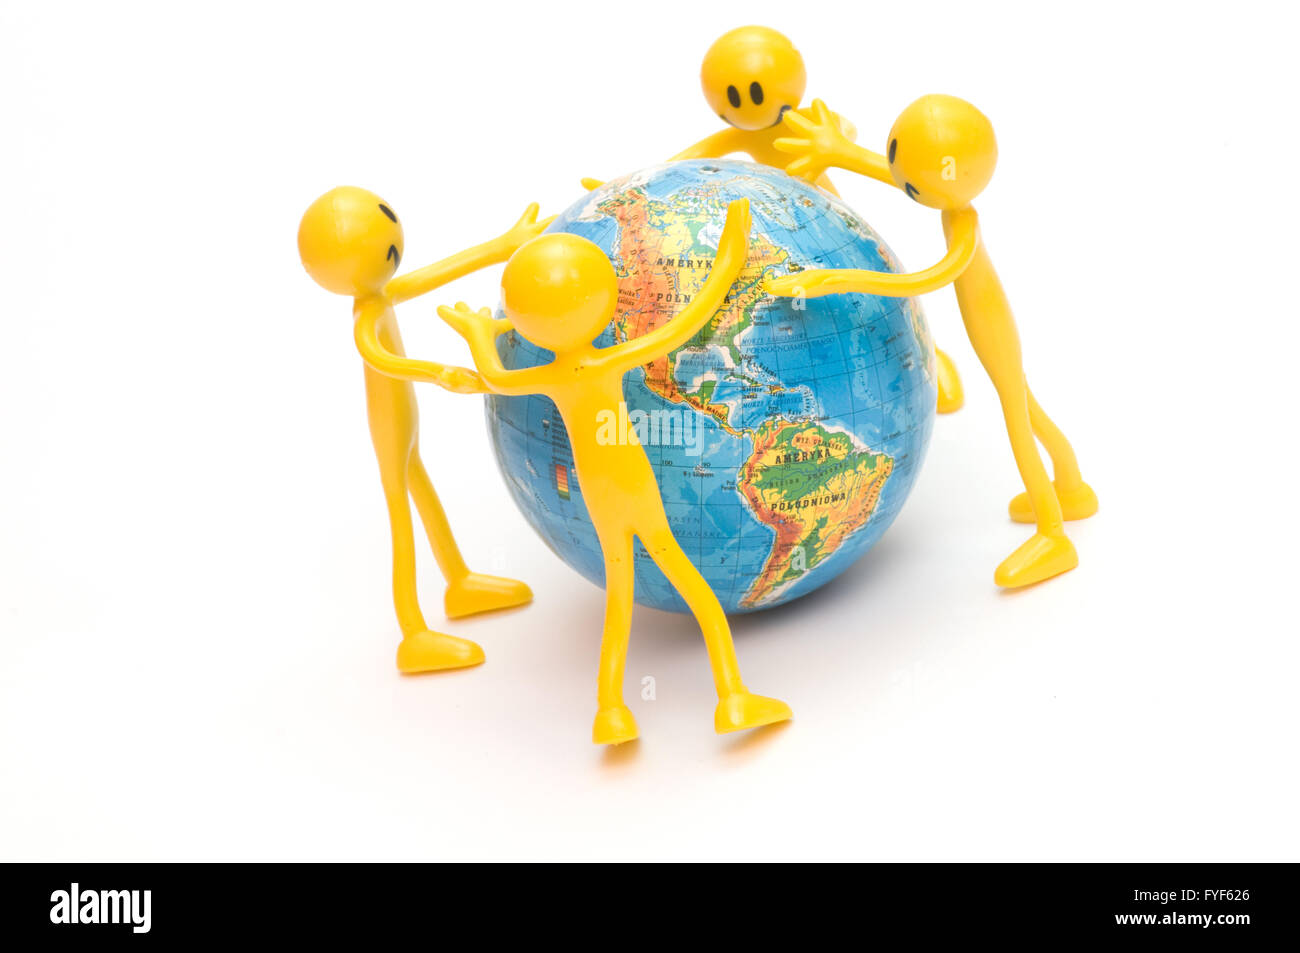 Save the planet conceptual image Stock Photo